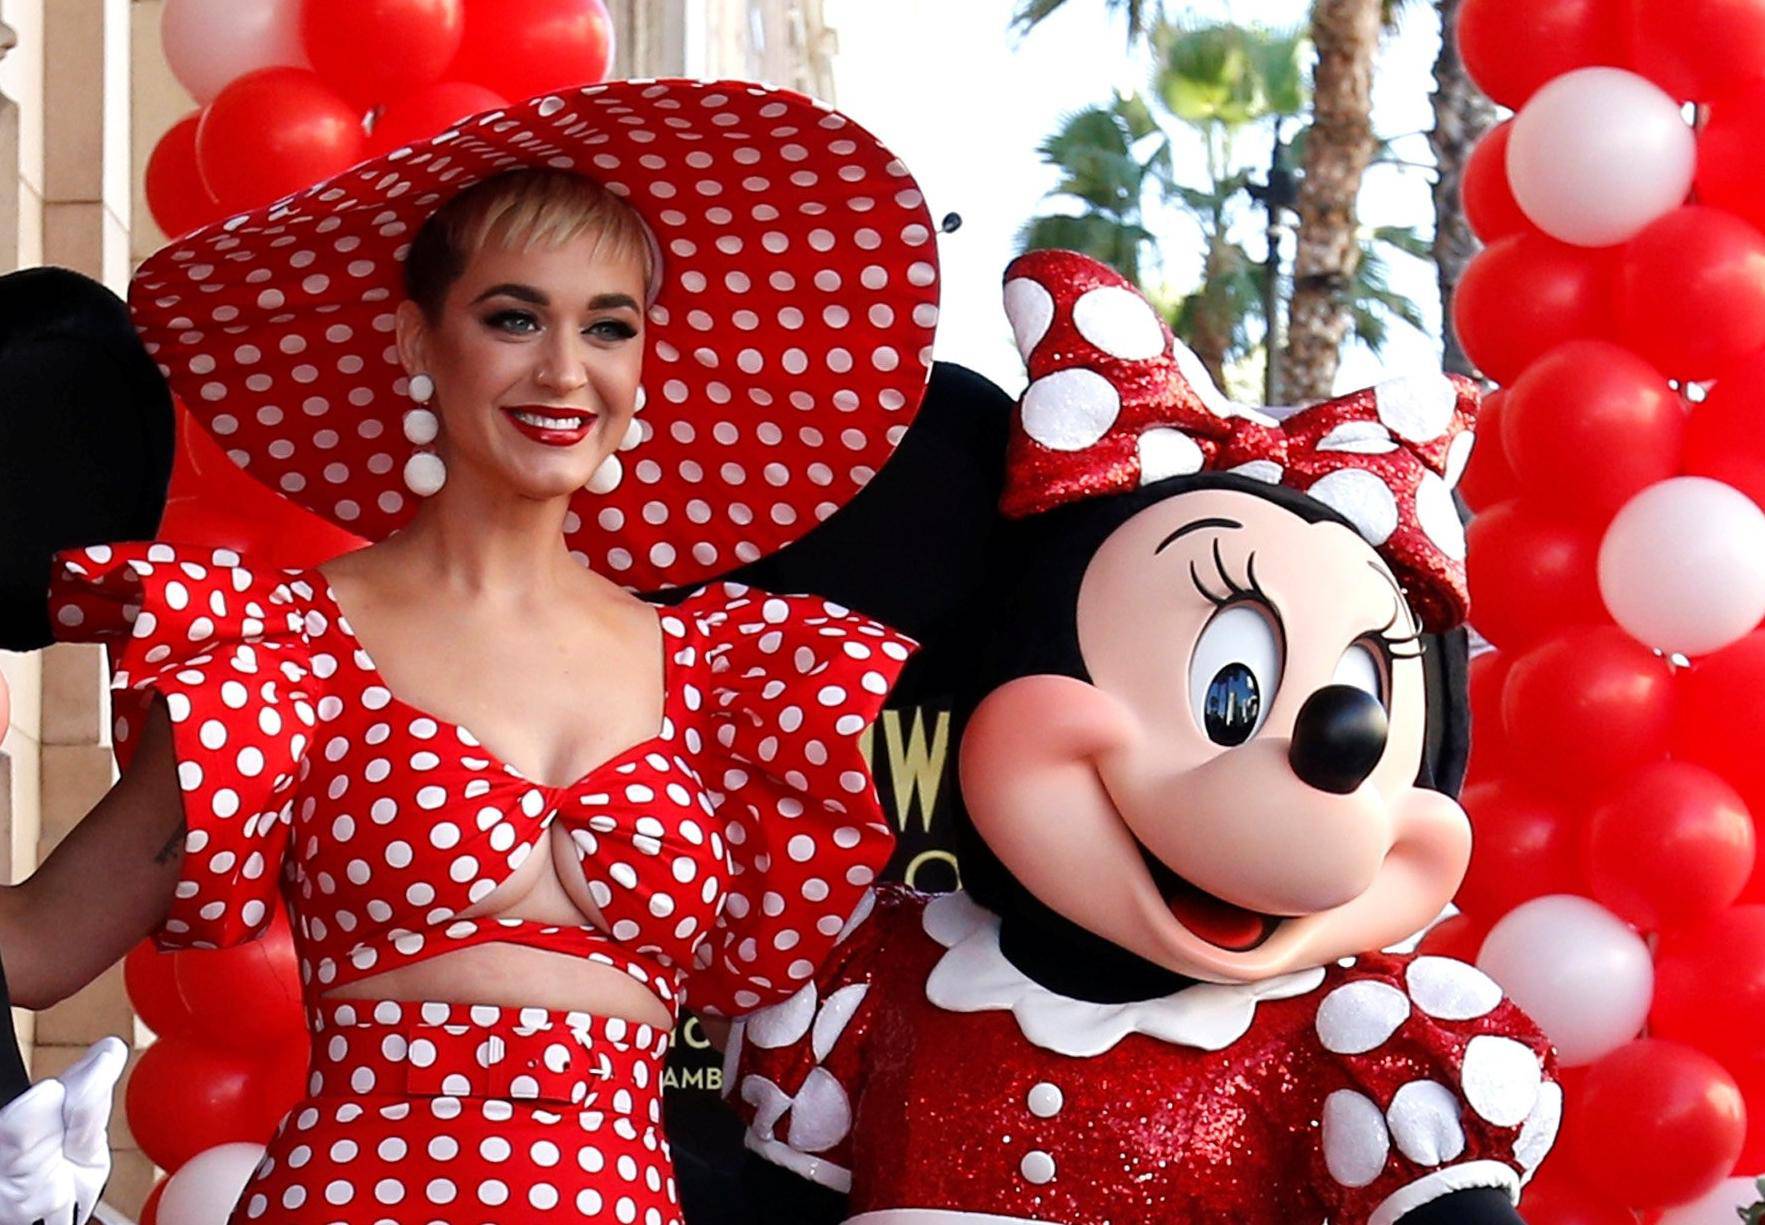 Singer Perry poses with the characters of Mickey Mouse and Minnie Mouse at the unveiling of the star for Minnie Mouse on the Hollywood Walk of Fame in Los Angeles